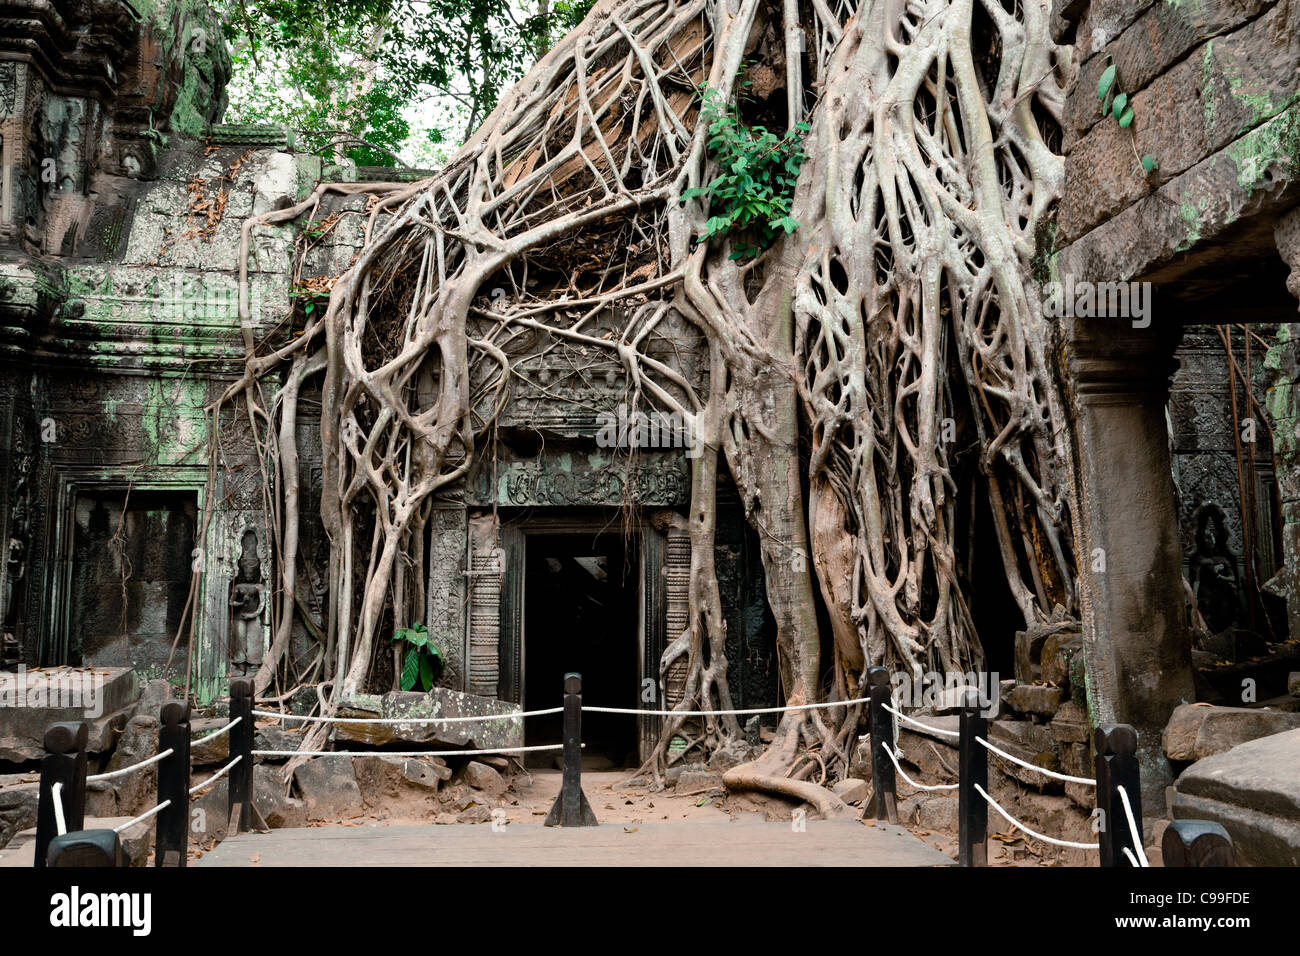 Ta Prohm is an ancient temple in Angkor Wat, Cambodia. Overgrown trees nearly damaged the ruined temple. Stock Photo